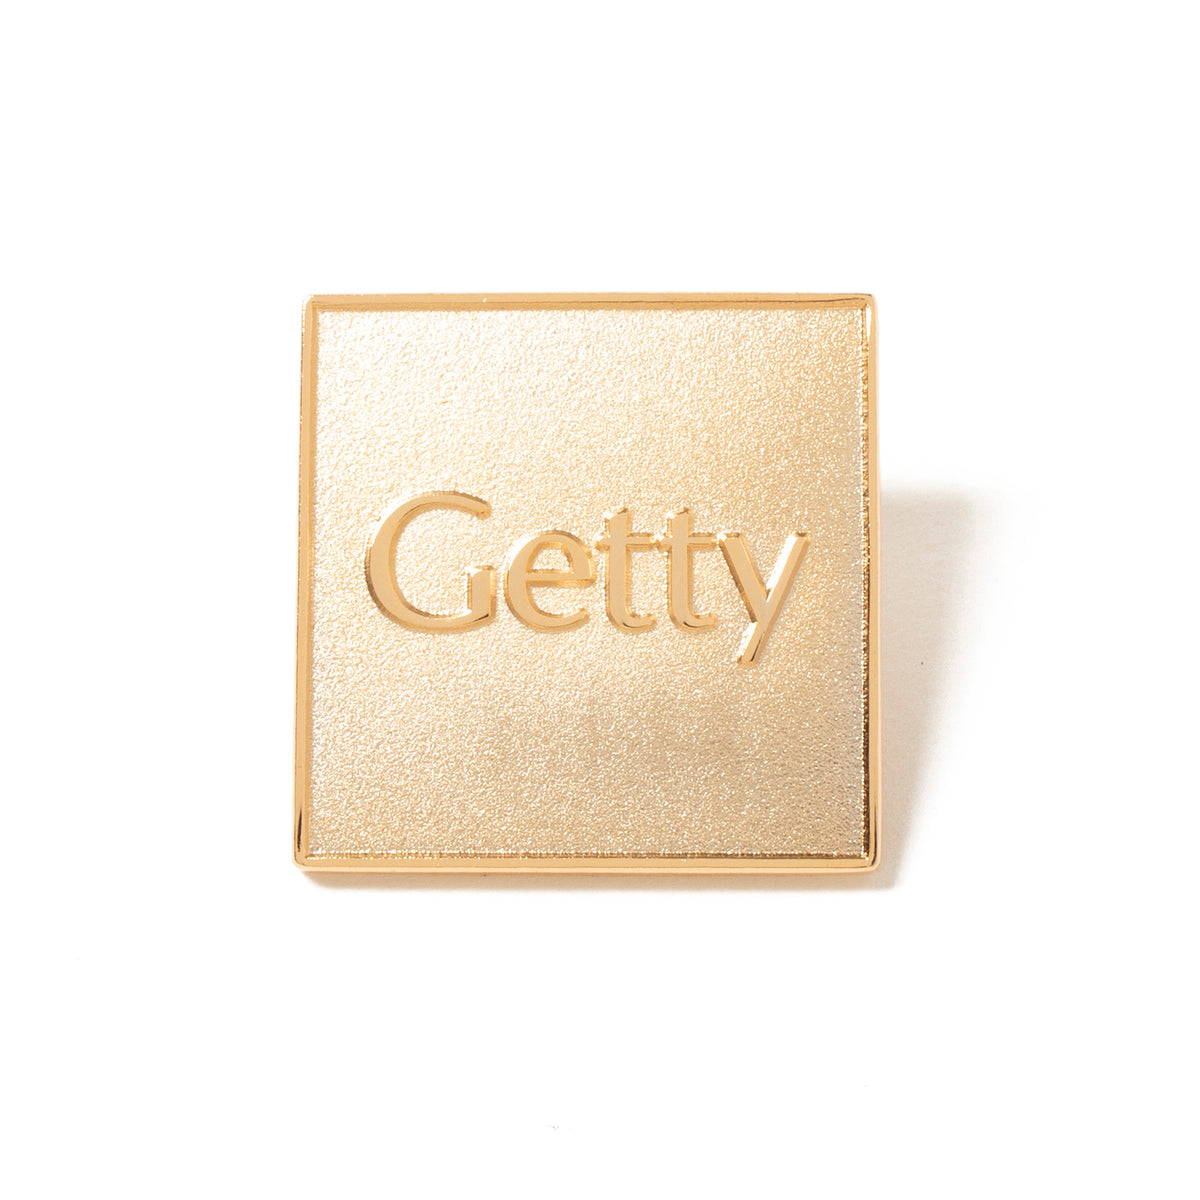 Getty Logo Collector Pin - Gold Tone